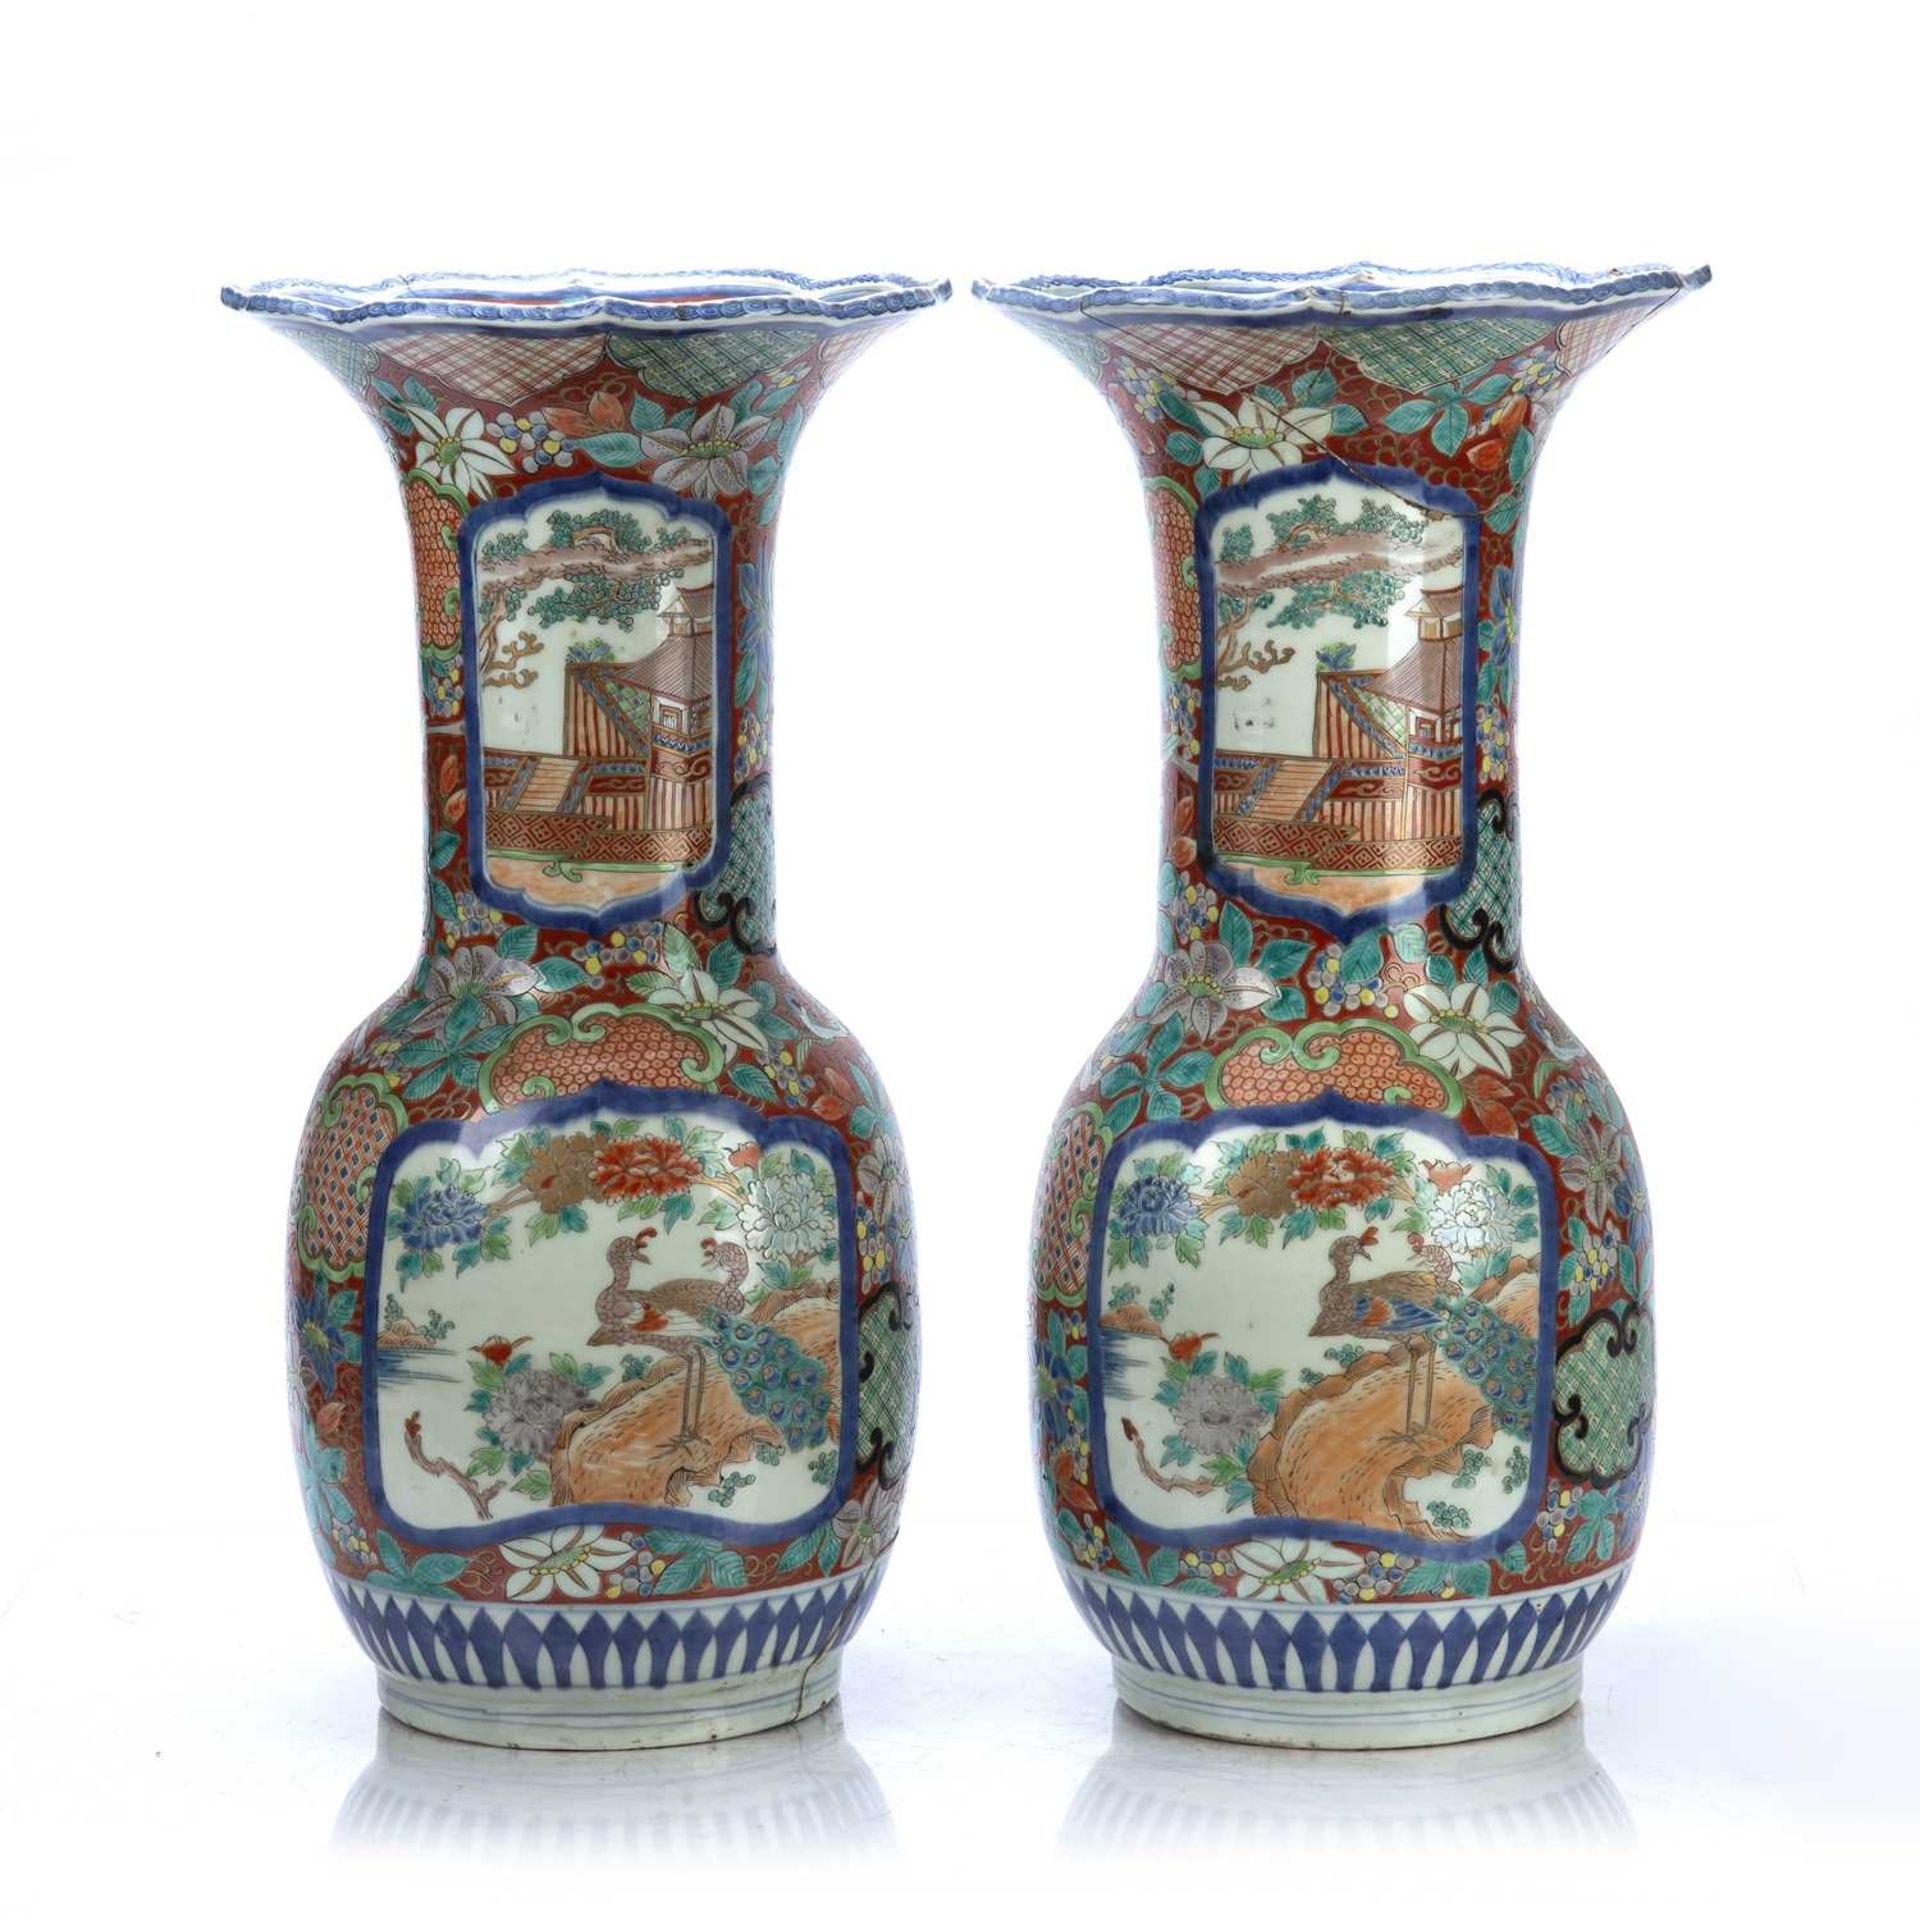 Pair of satsuma baluster vases Japanese, with Chinese style decoration including birds and - Image 2 of 4